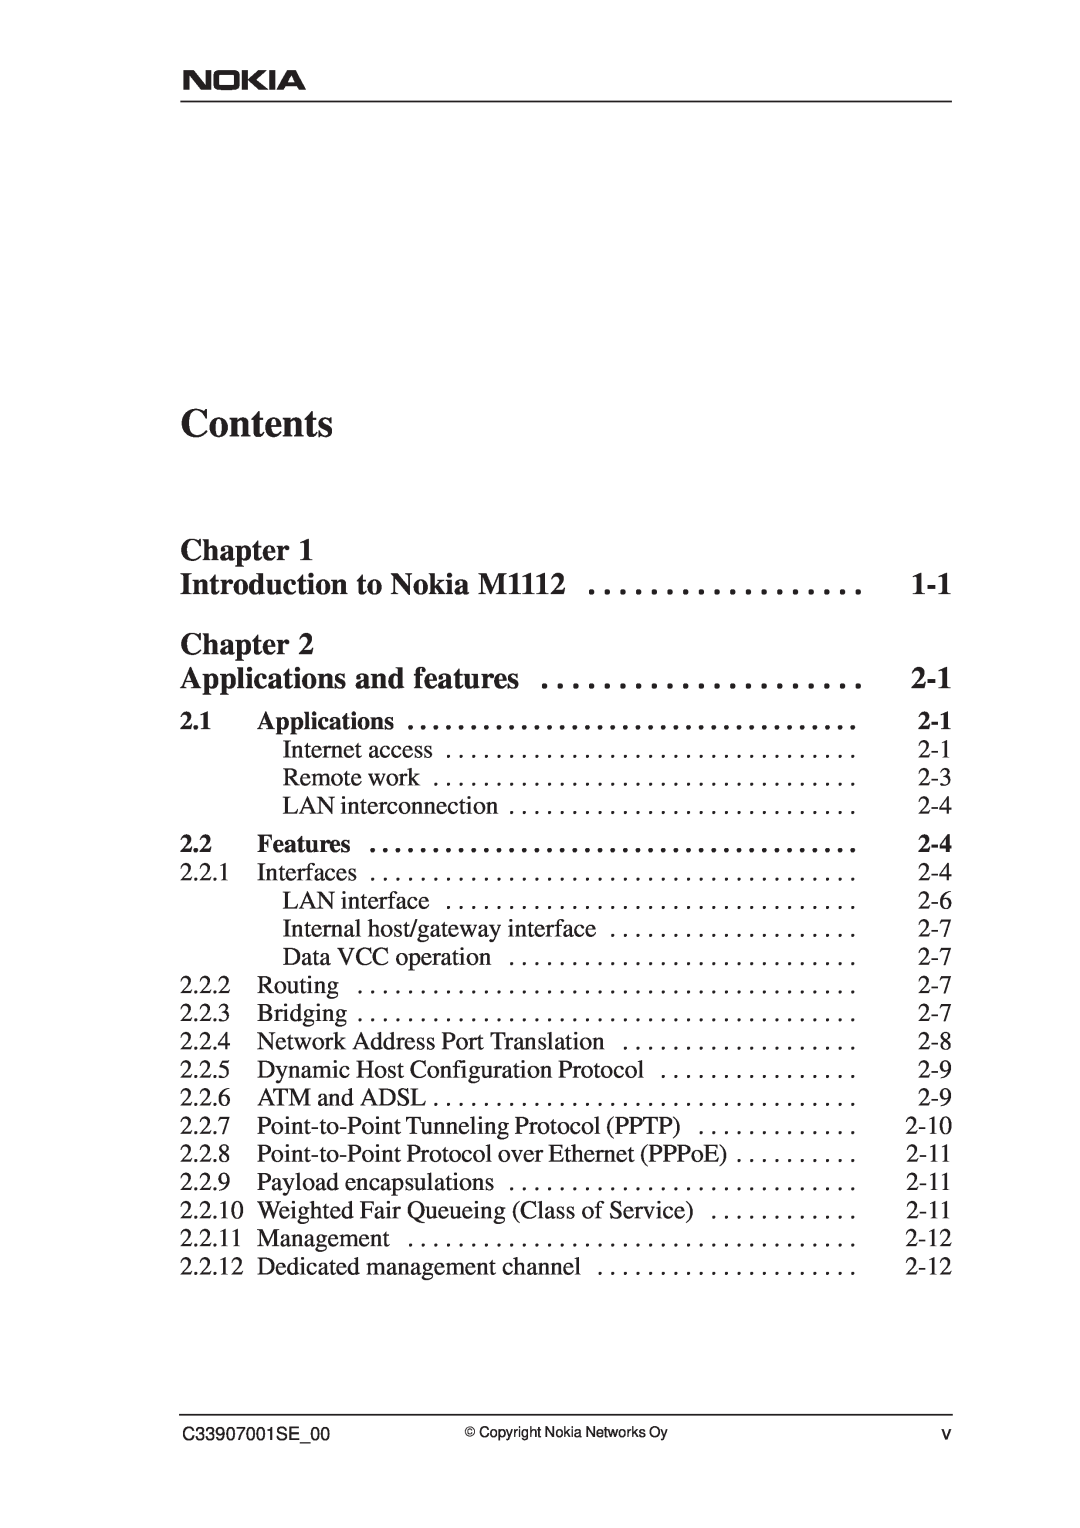 Nokia manual Contents, Chapter, Introduction to Nokia M1112, Applications and features 